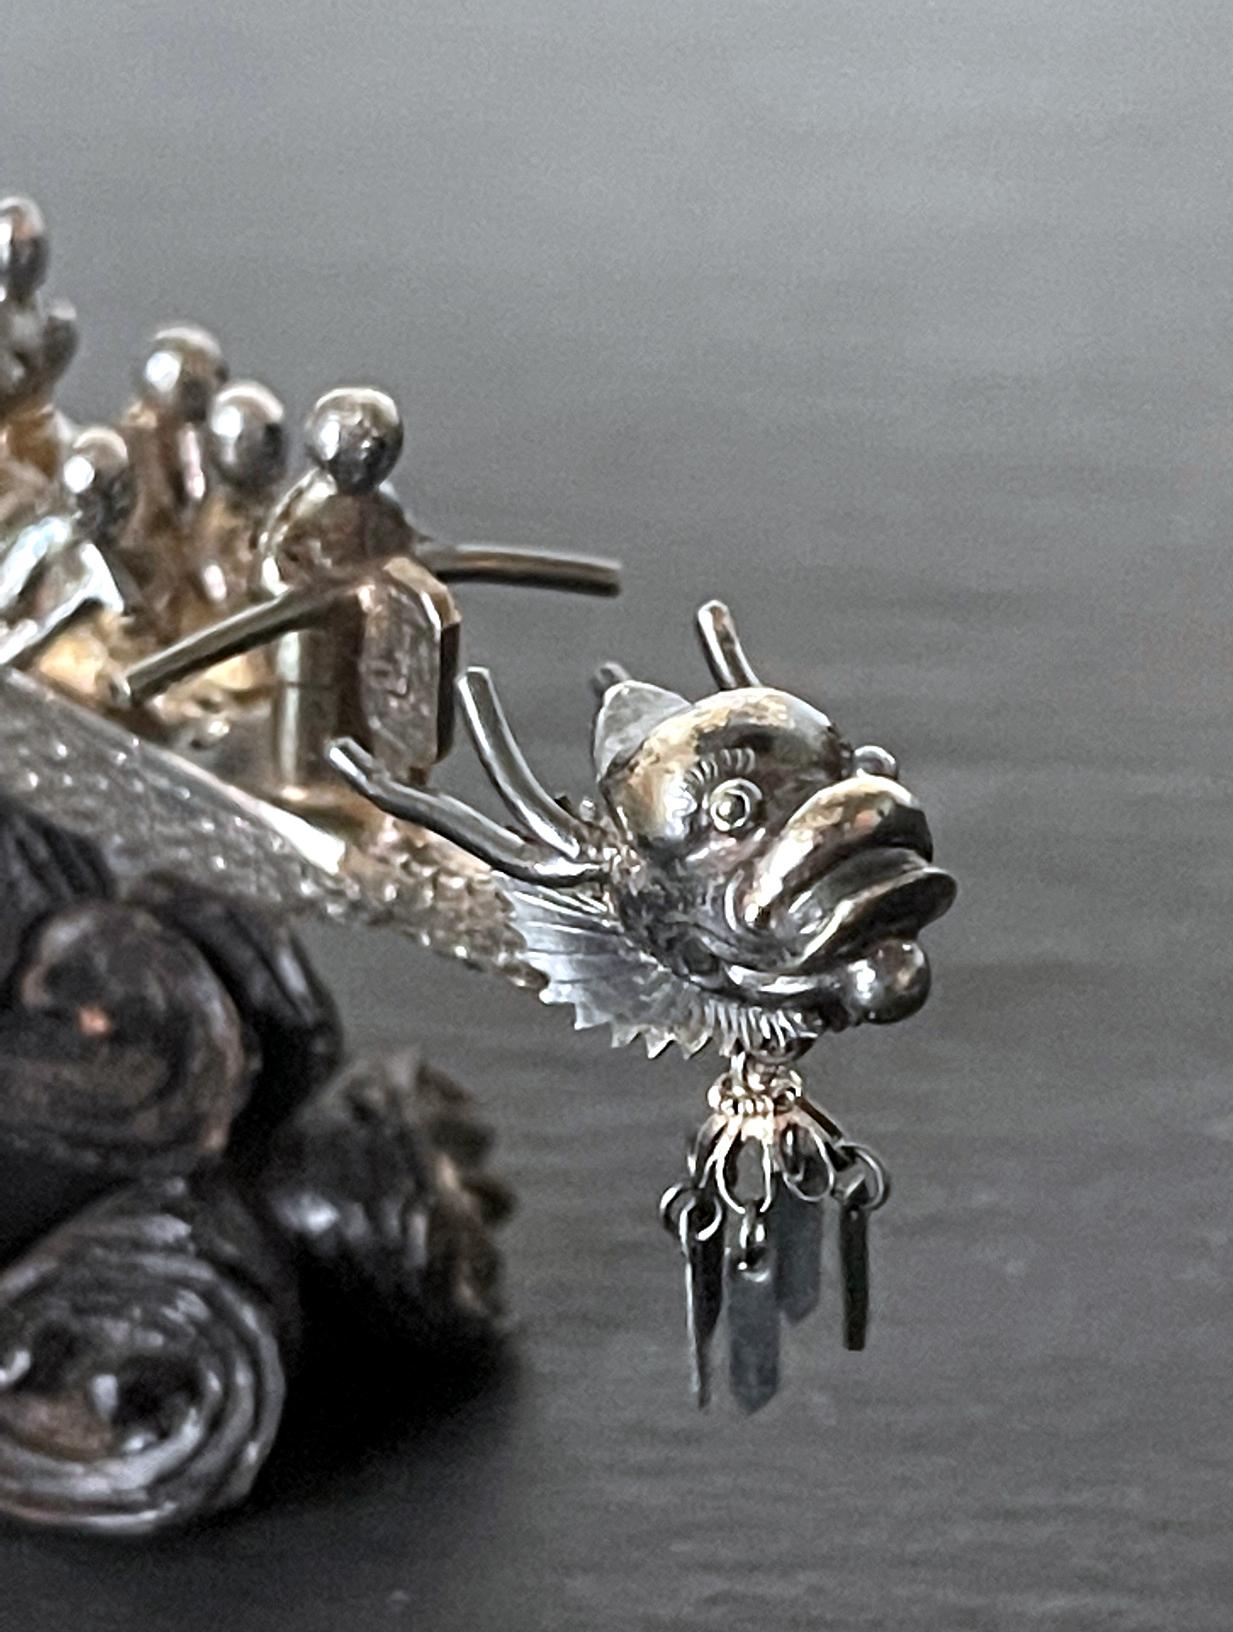 Chinese Silver Dragon Boat Model on Wood Base 5